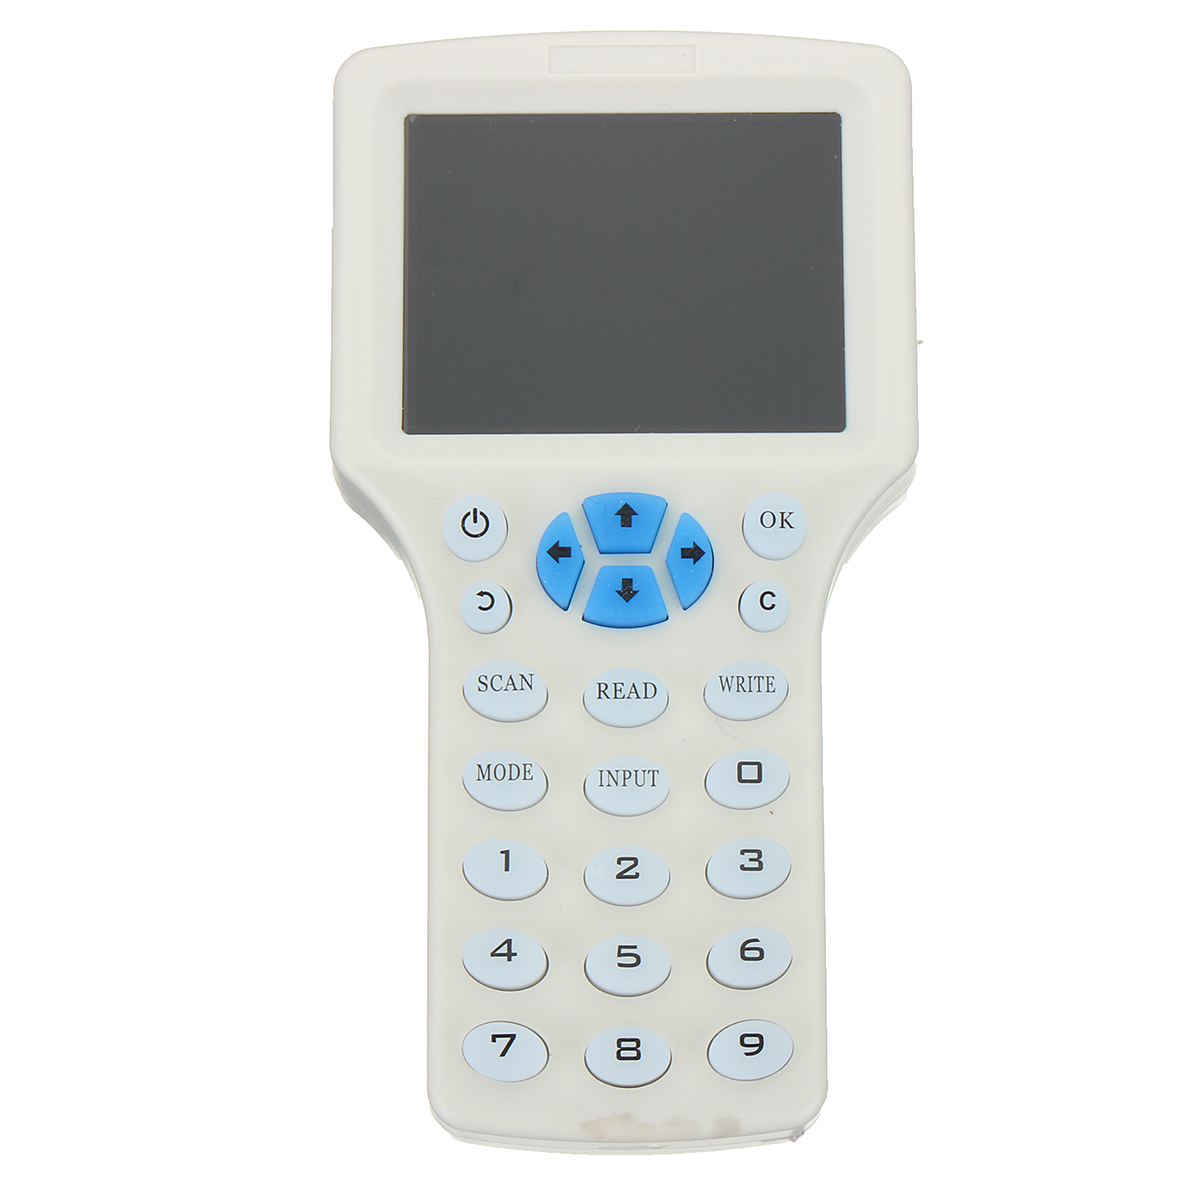 10-Frequency-RFID-Copy-Encrypted-NFC-Smart-ID-IC-Card-Reader-Writer-with-12pcs-Keyfbobs-1270370